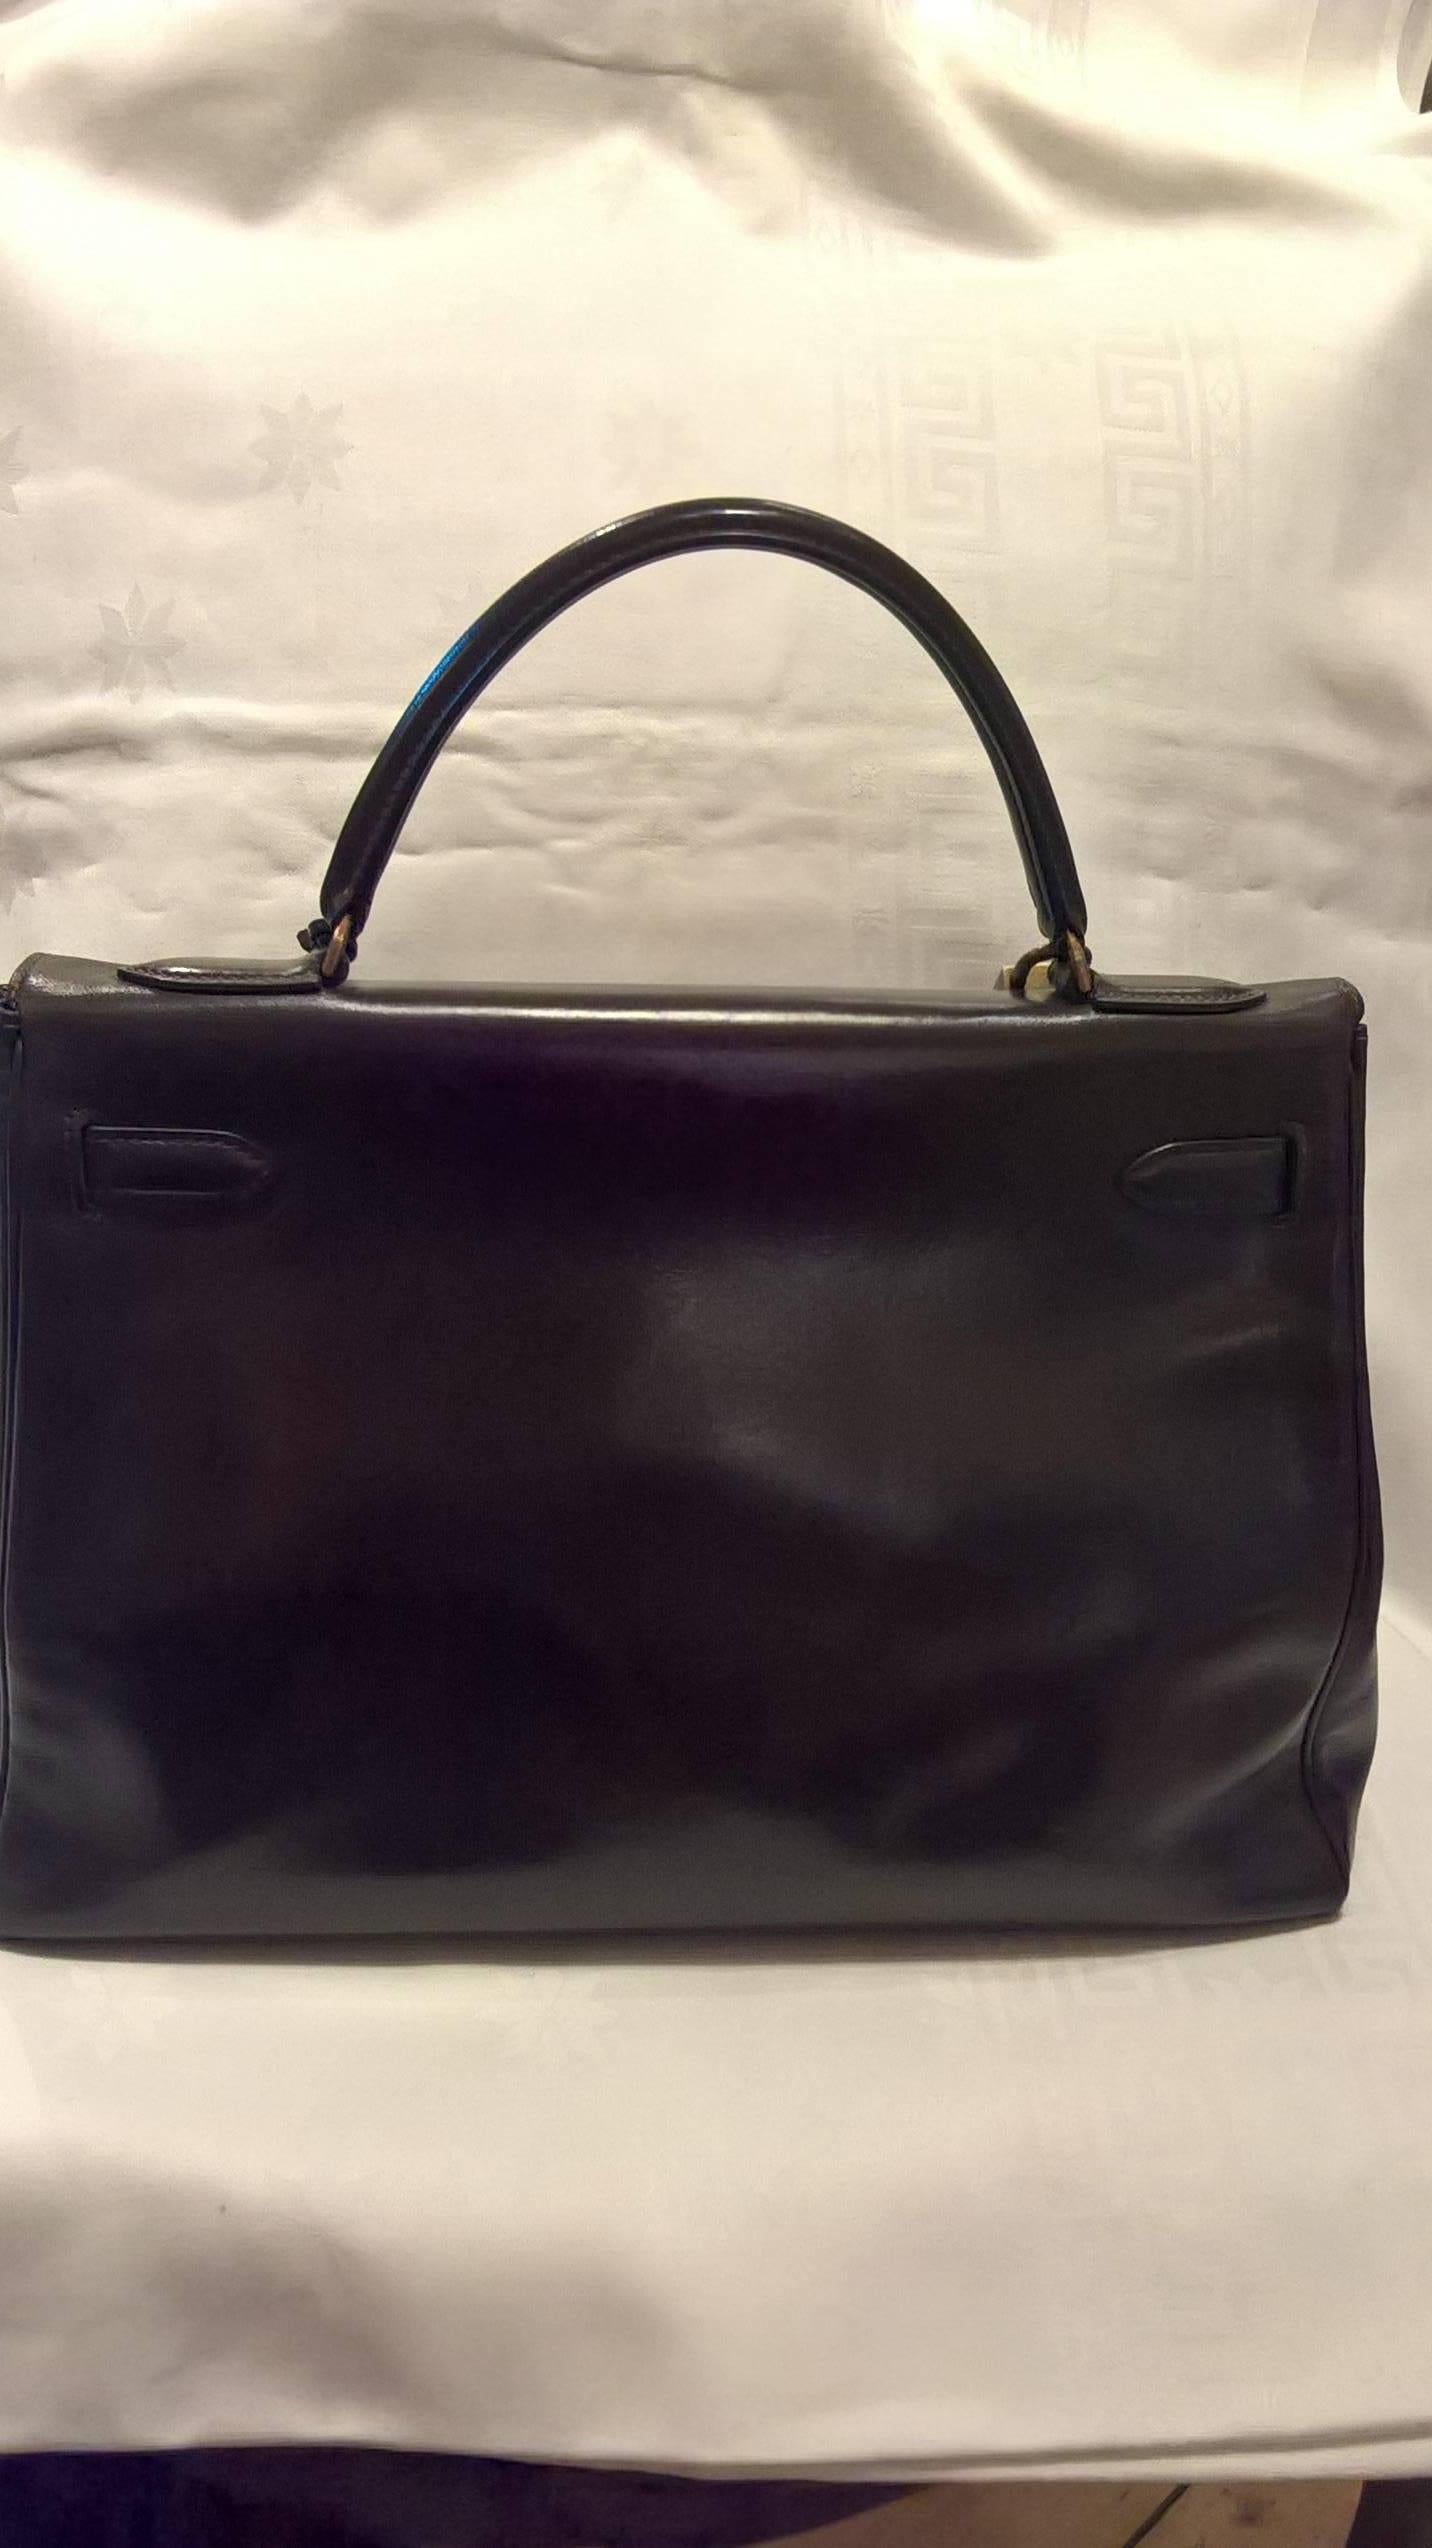 Vintage Hermes Kelly bag 28 cm in dark brown box calf leather. Gold hardware. Stamped B in a circle. Corners of the bag in very good condition. Barely used. No strap.